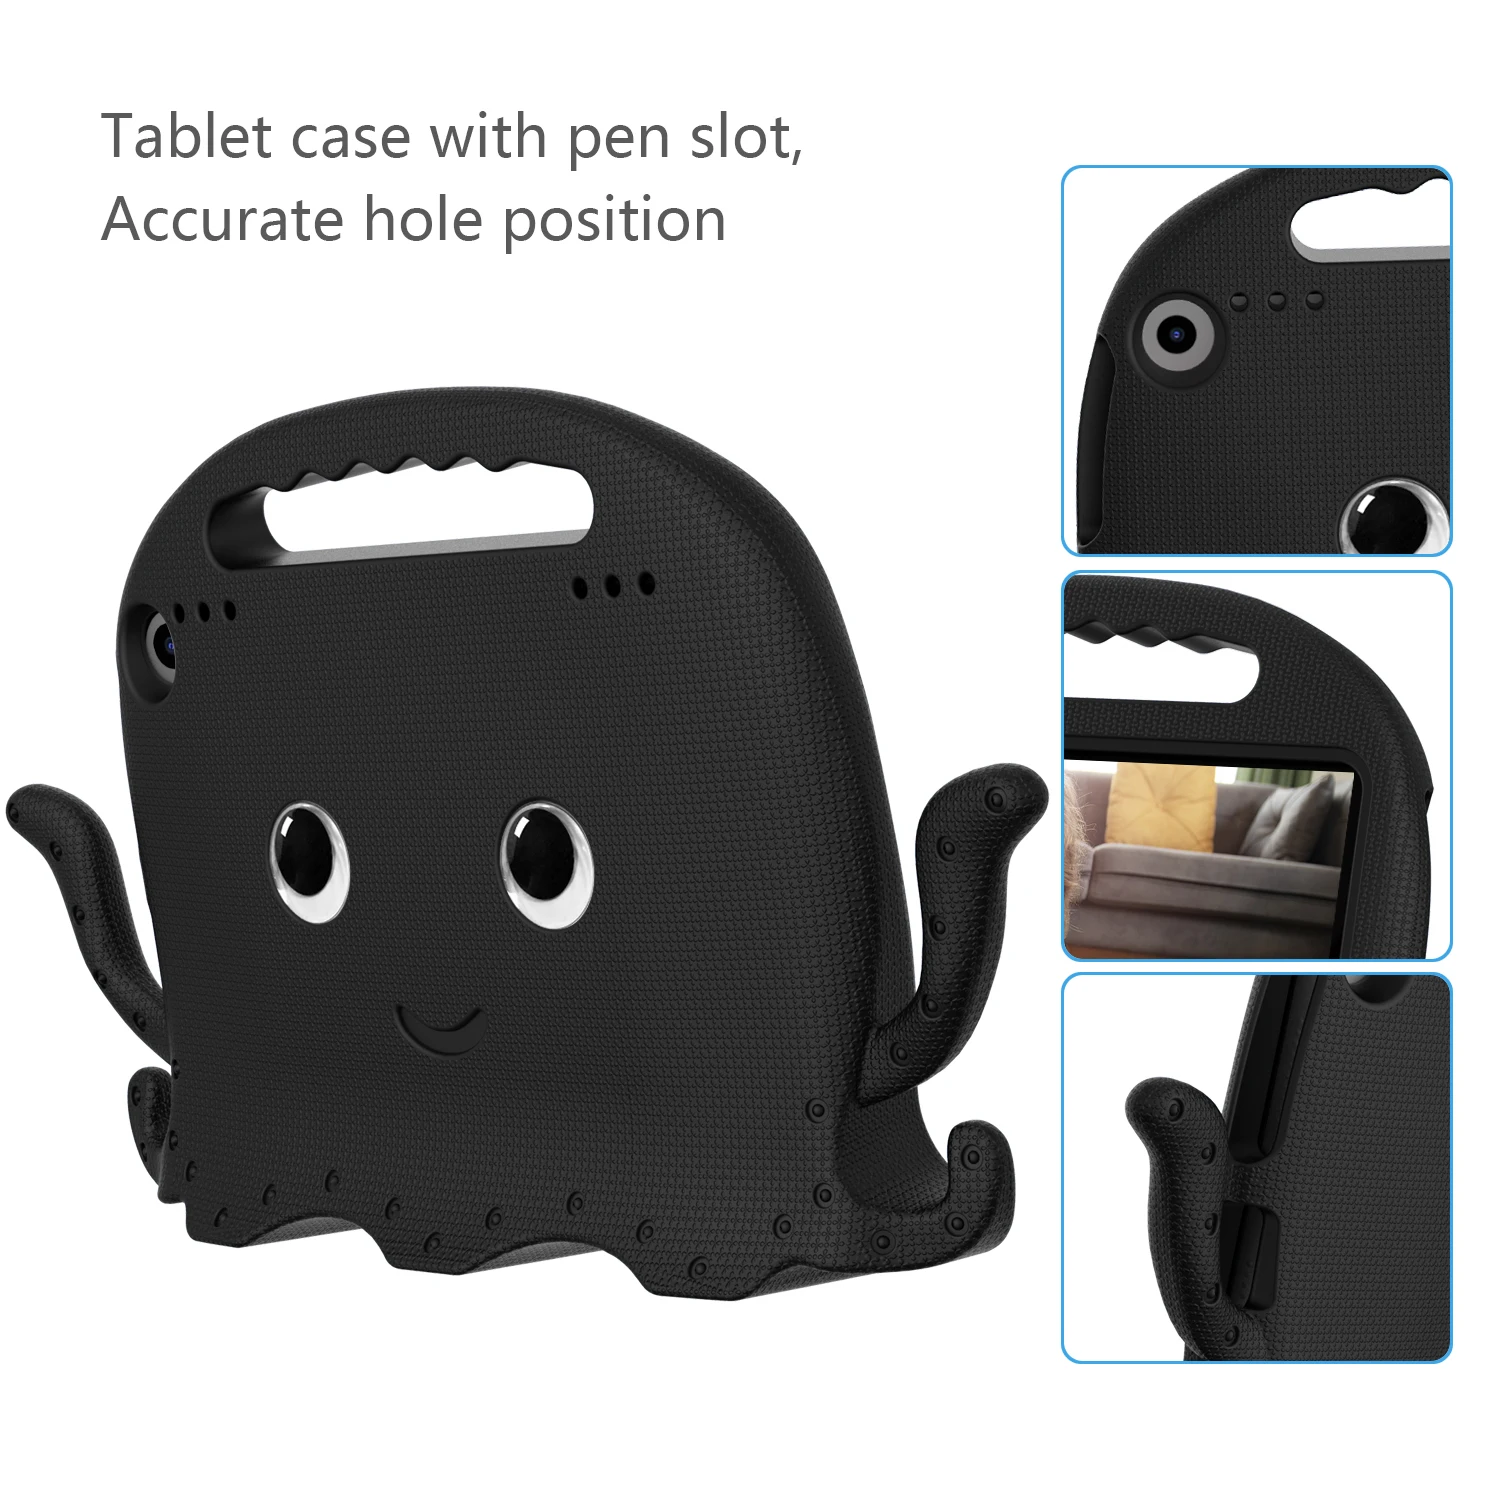 

Case for Samsung Galaxy Tab S6 Lite P610 SM- P610 P615 SM-P615 10.4" 2020 hand-held Shock Proof EVA stand kids cover case +pen